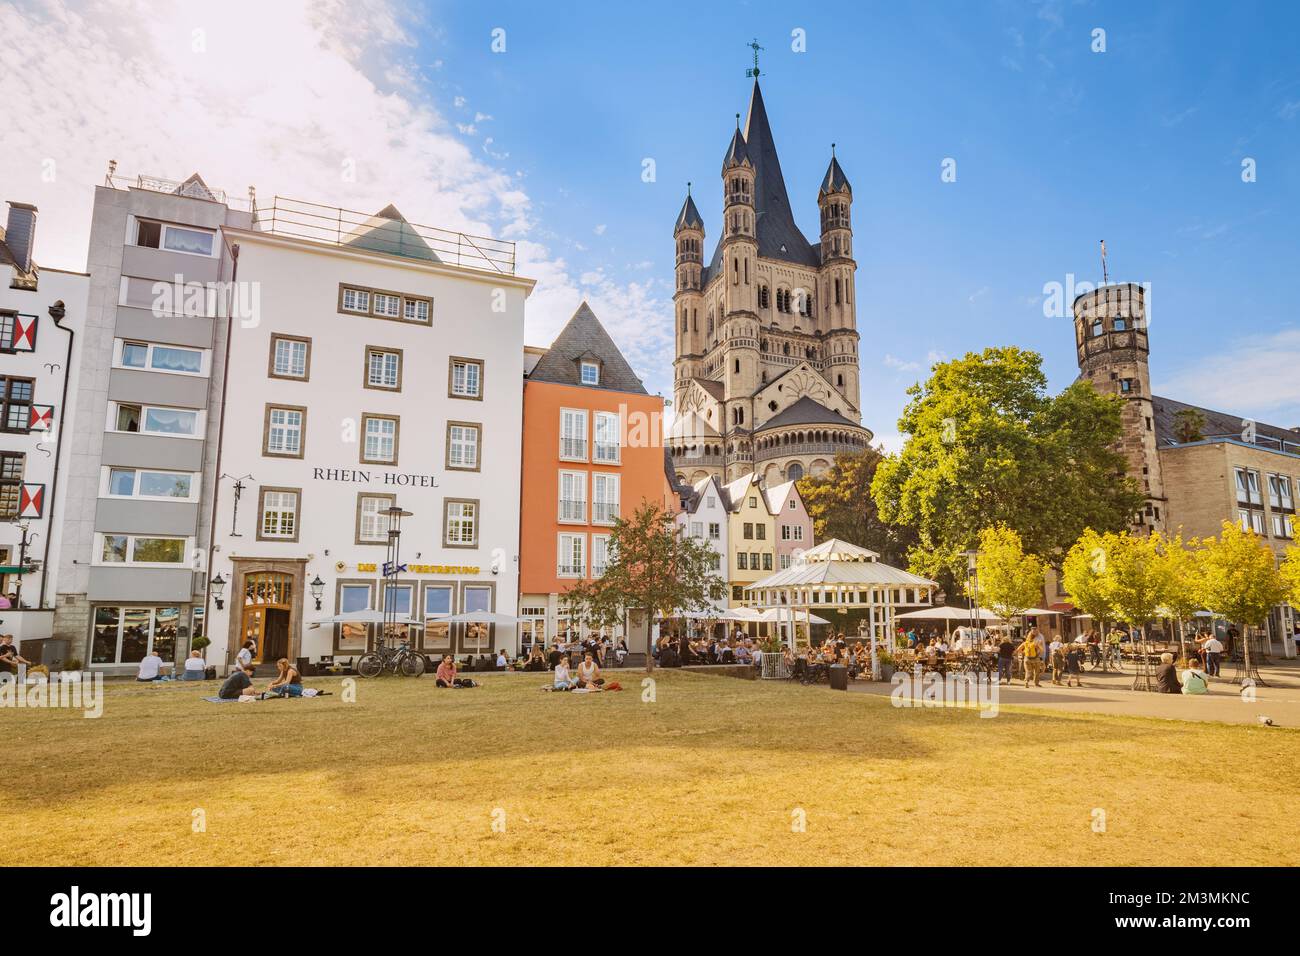 29 July 2022, Cologne, Germany: Fish market square with tourists resting in cafes, colorful houses and St. Martin Church in Koln. Travel and sightseei Stock Photo